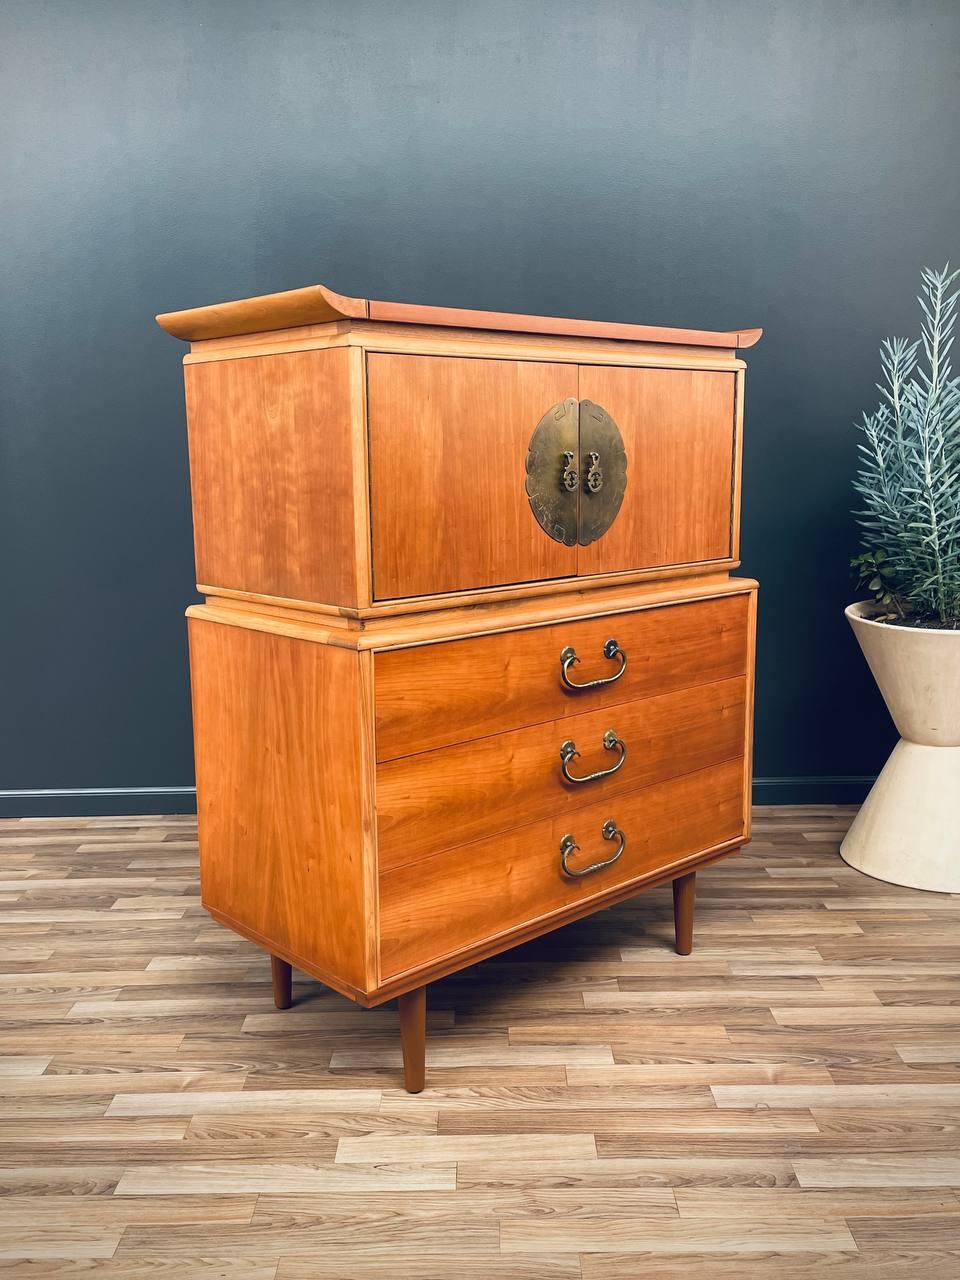 With over 15 years of experience, our workshop has followed a careful process of restoration, showcasing our passion and creativity for vintage designs that can seamlessly be incorporated with many interior decors. Enjoy! :)

Materials: Elm Wood